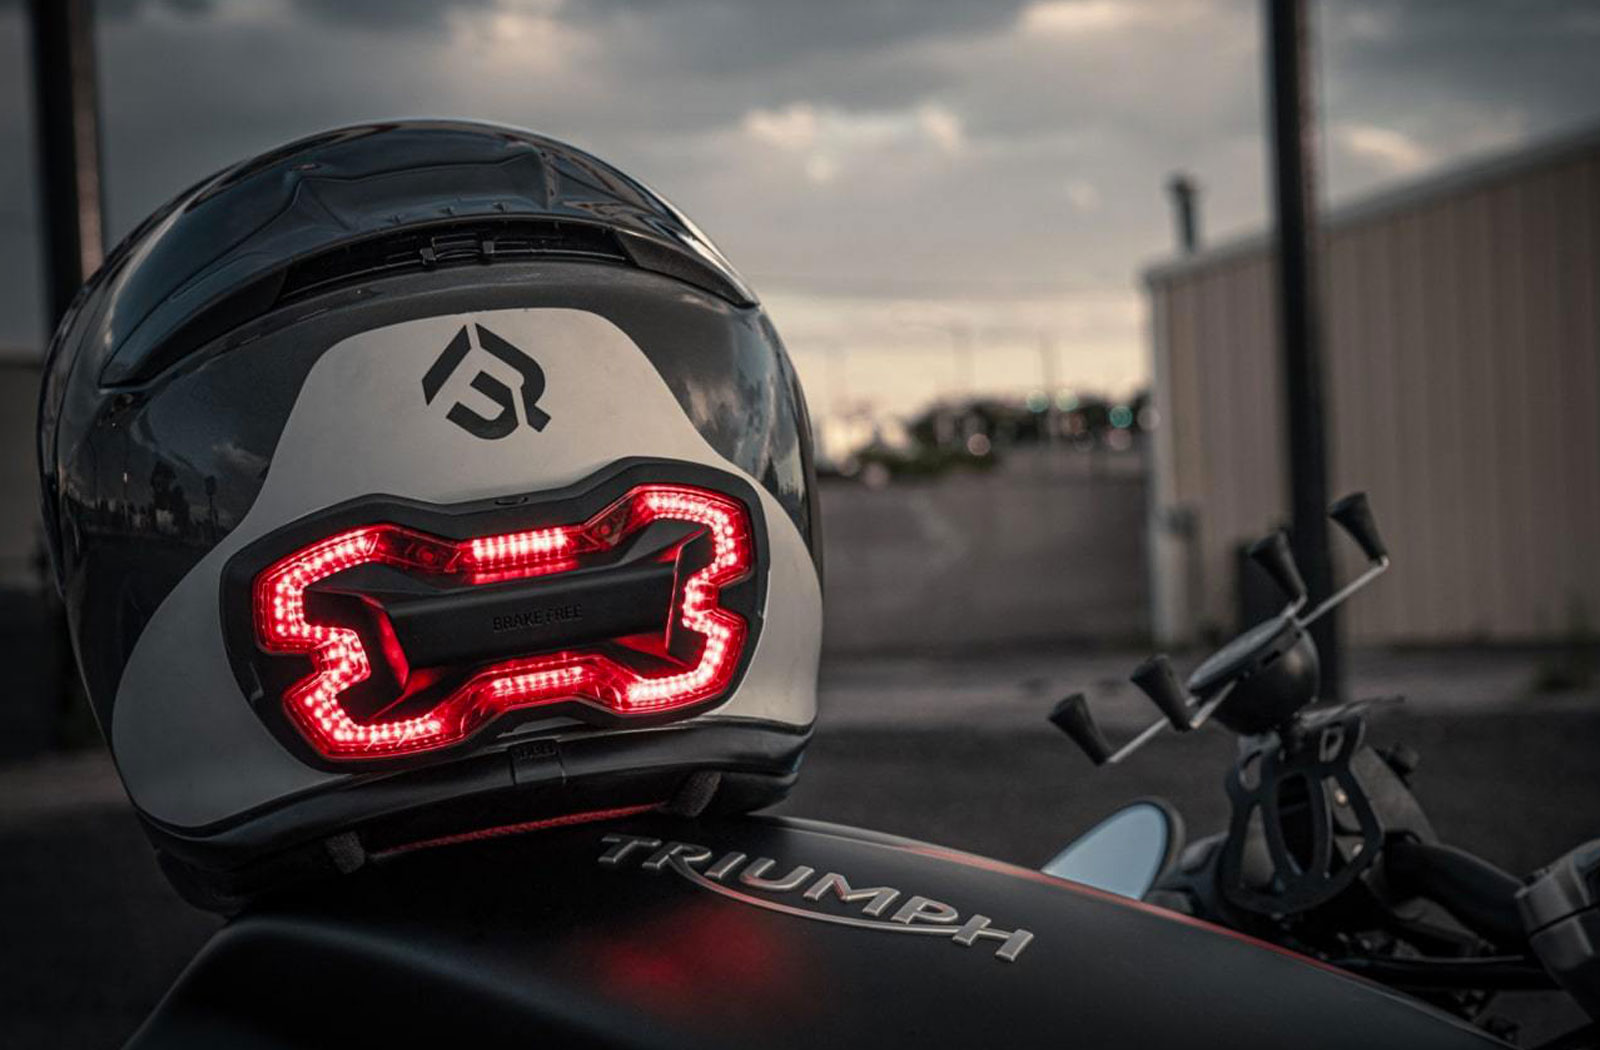 Top 5 Ducati Motorcycle Accessories Every Rider Needs